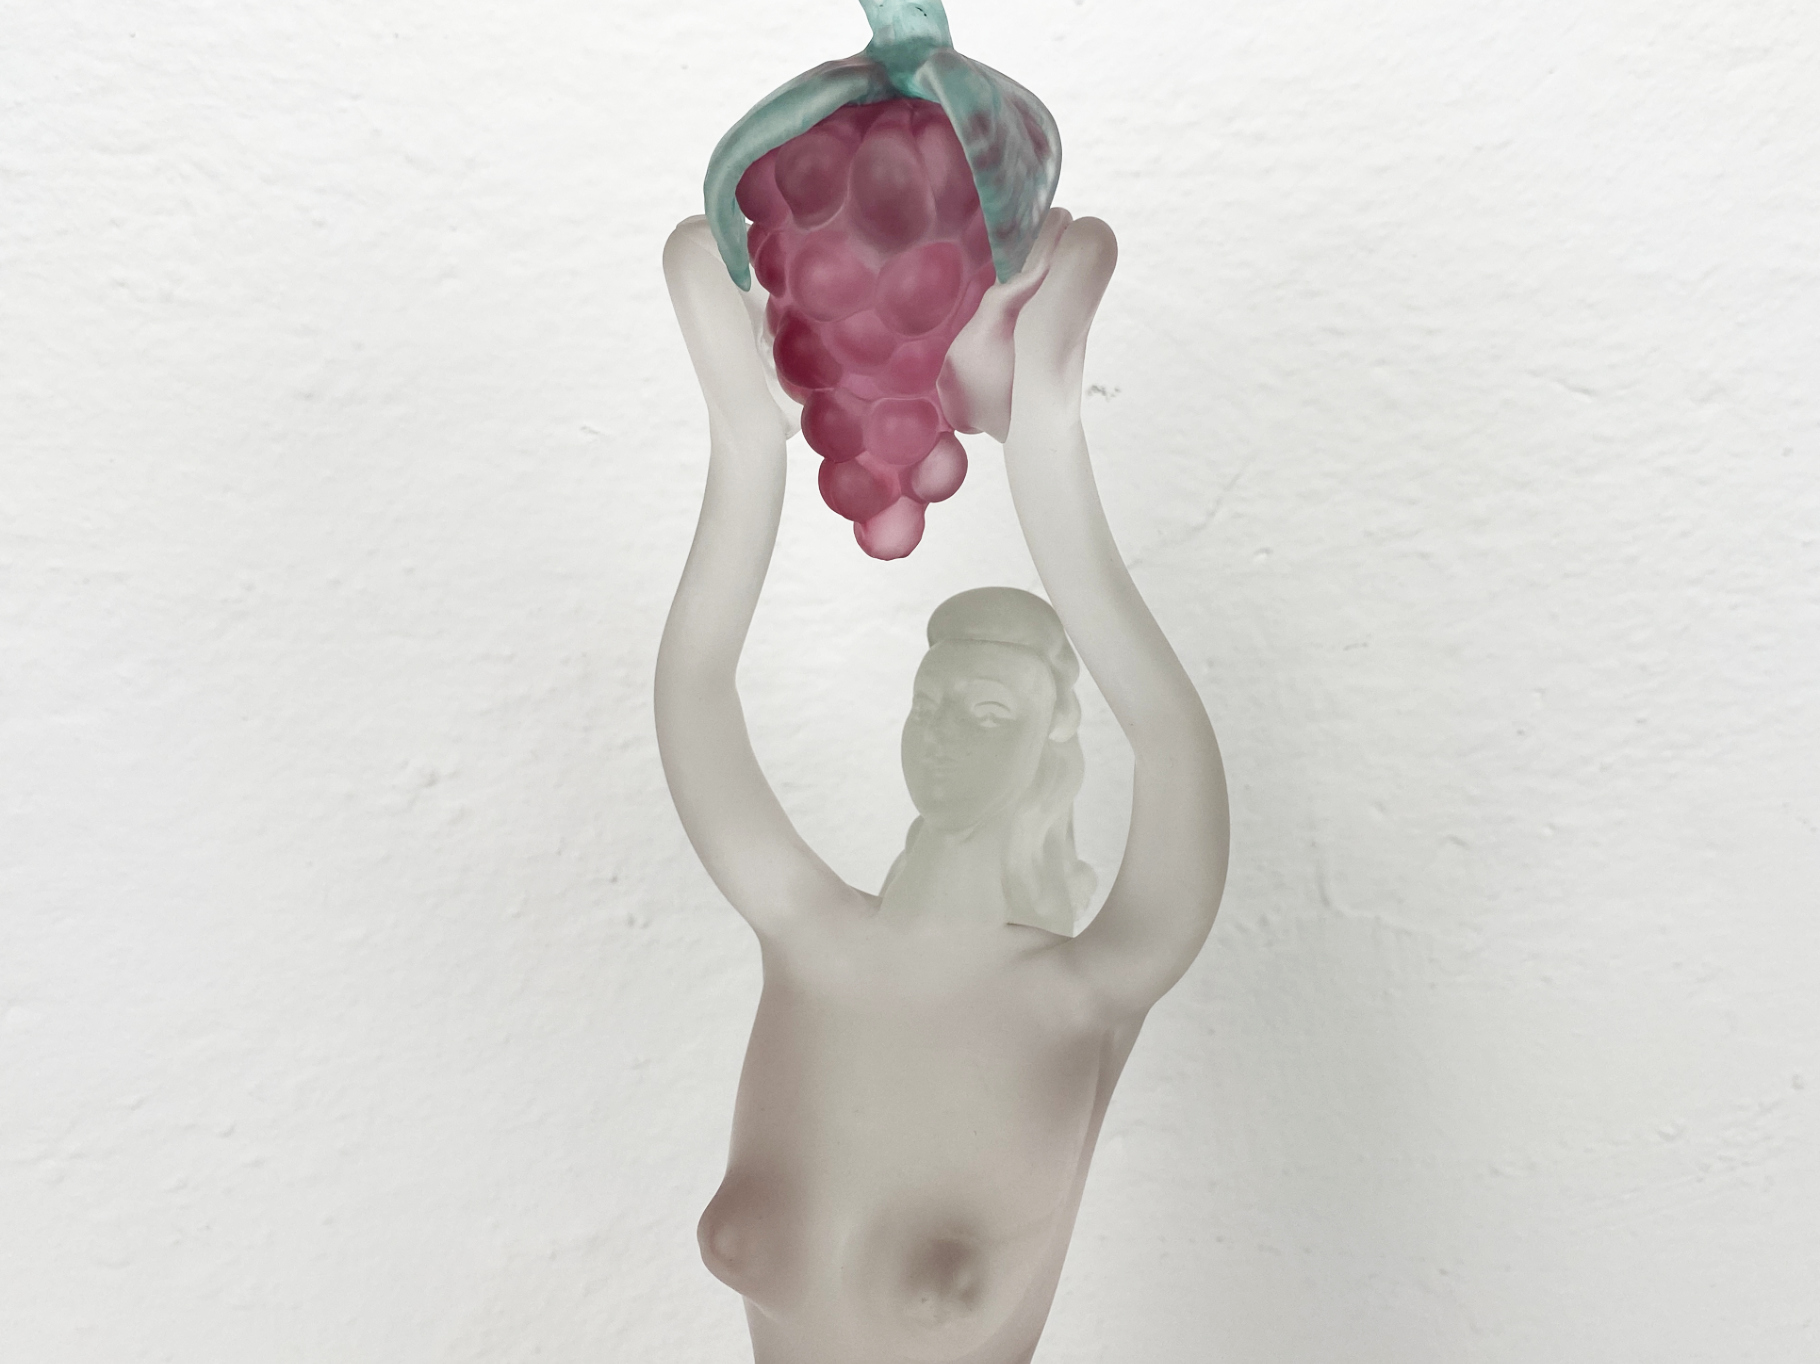 Art Deco Figure, Nude Woman with Grapes, satin-finished Murano Glass by Archimede Seguso for Seguso Vetri d'Arte, Italy, 1950s